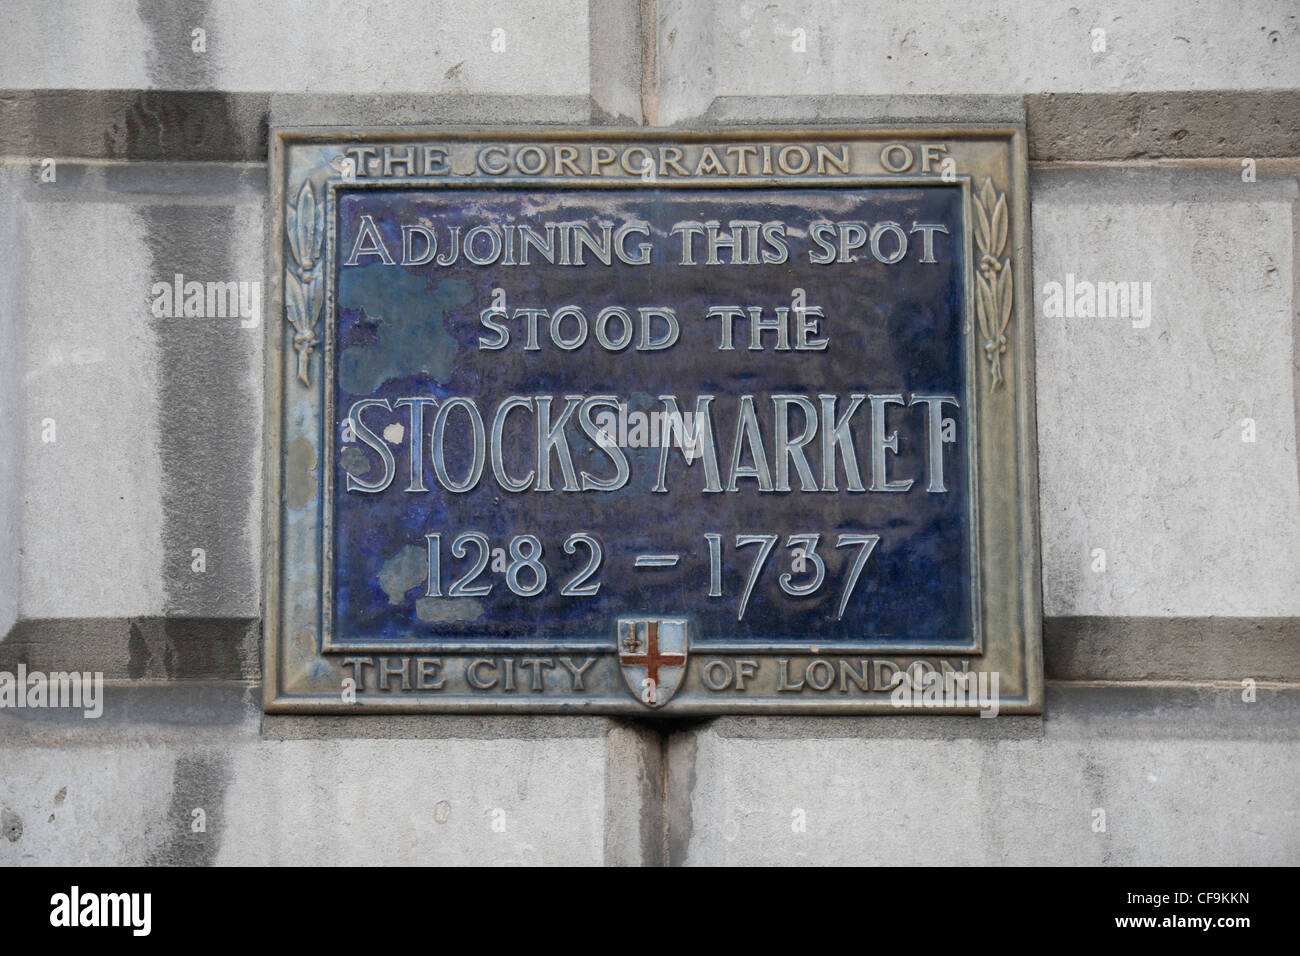 Plaque marking the spot of the original Stock Market building, 1282-1737 on Mansion House, in the City of London, England. Stock Photo